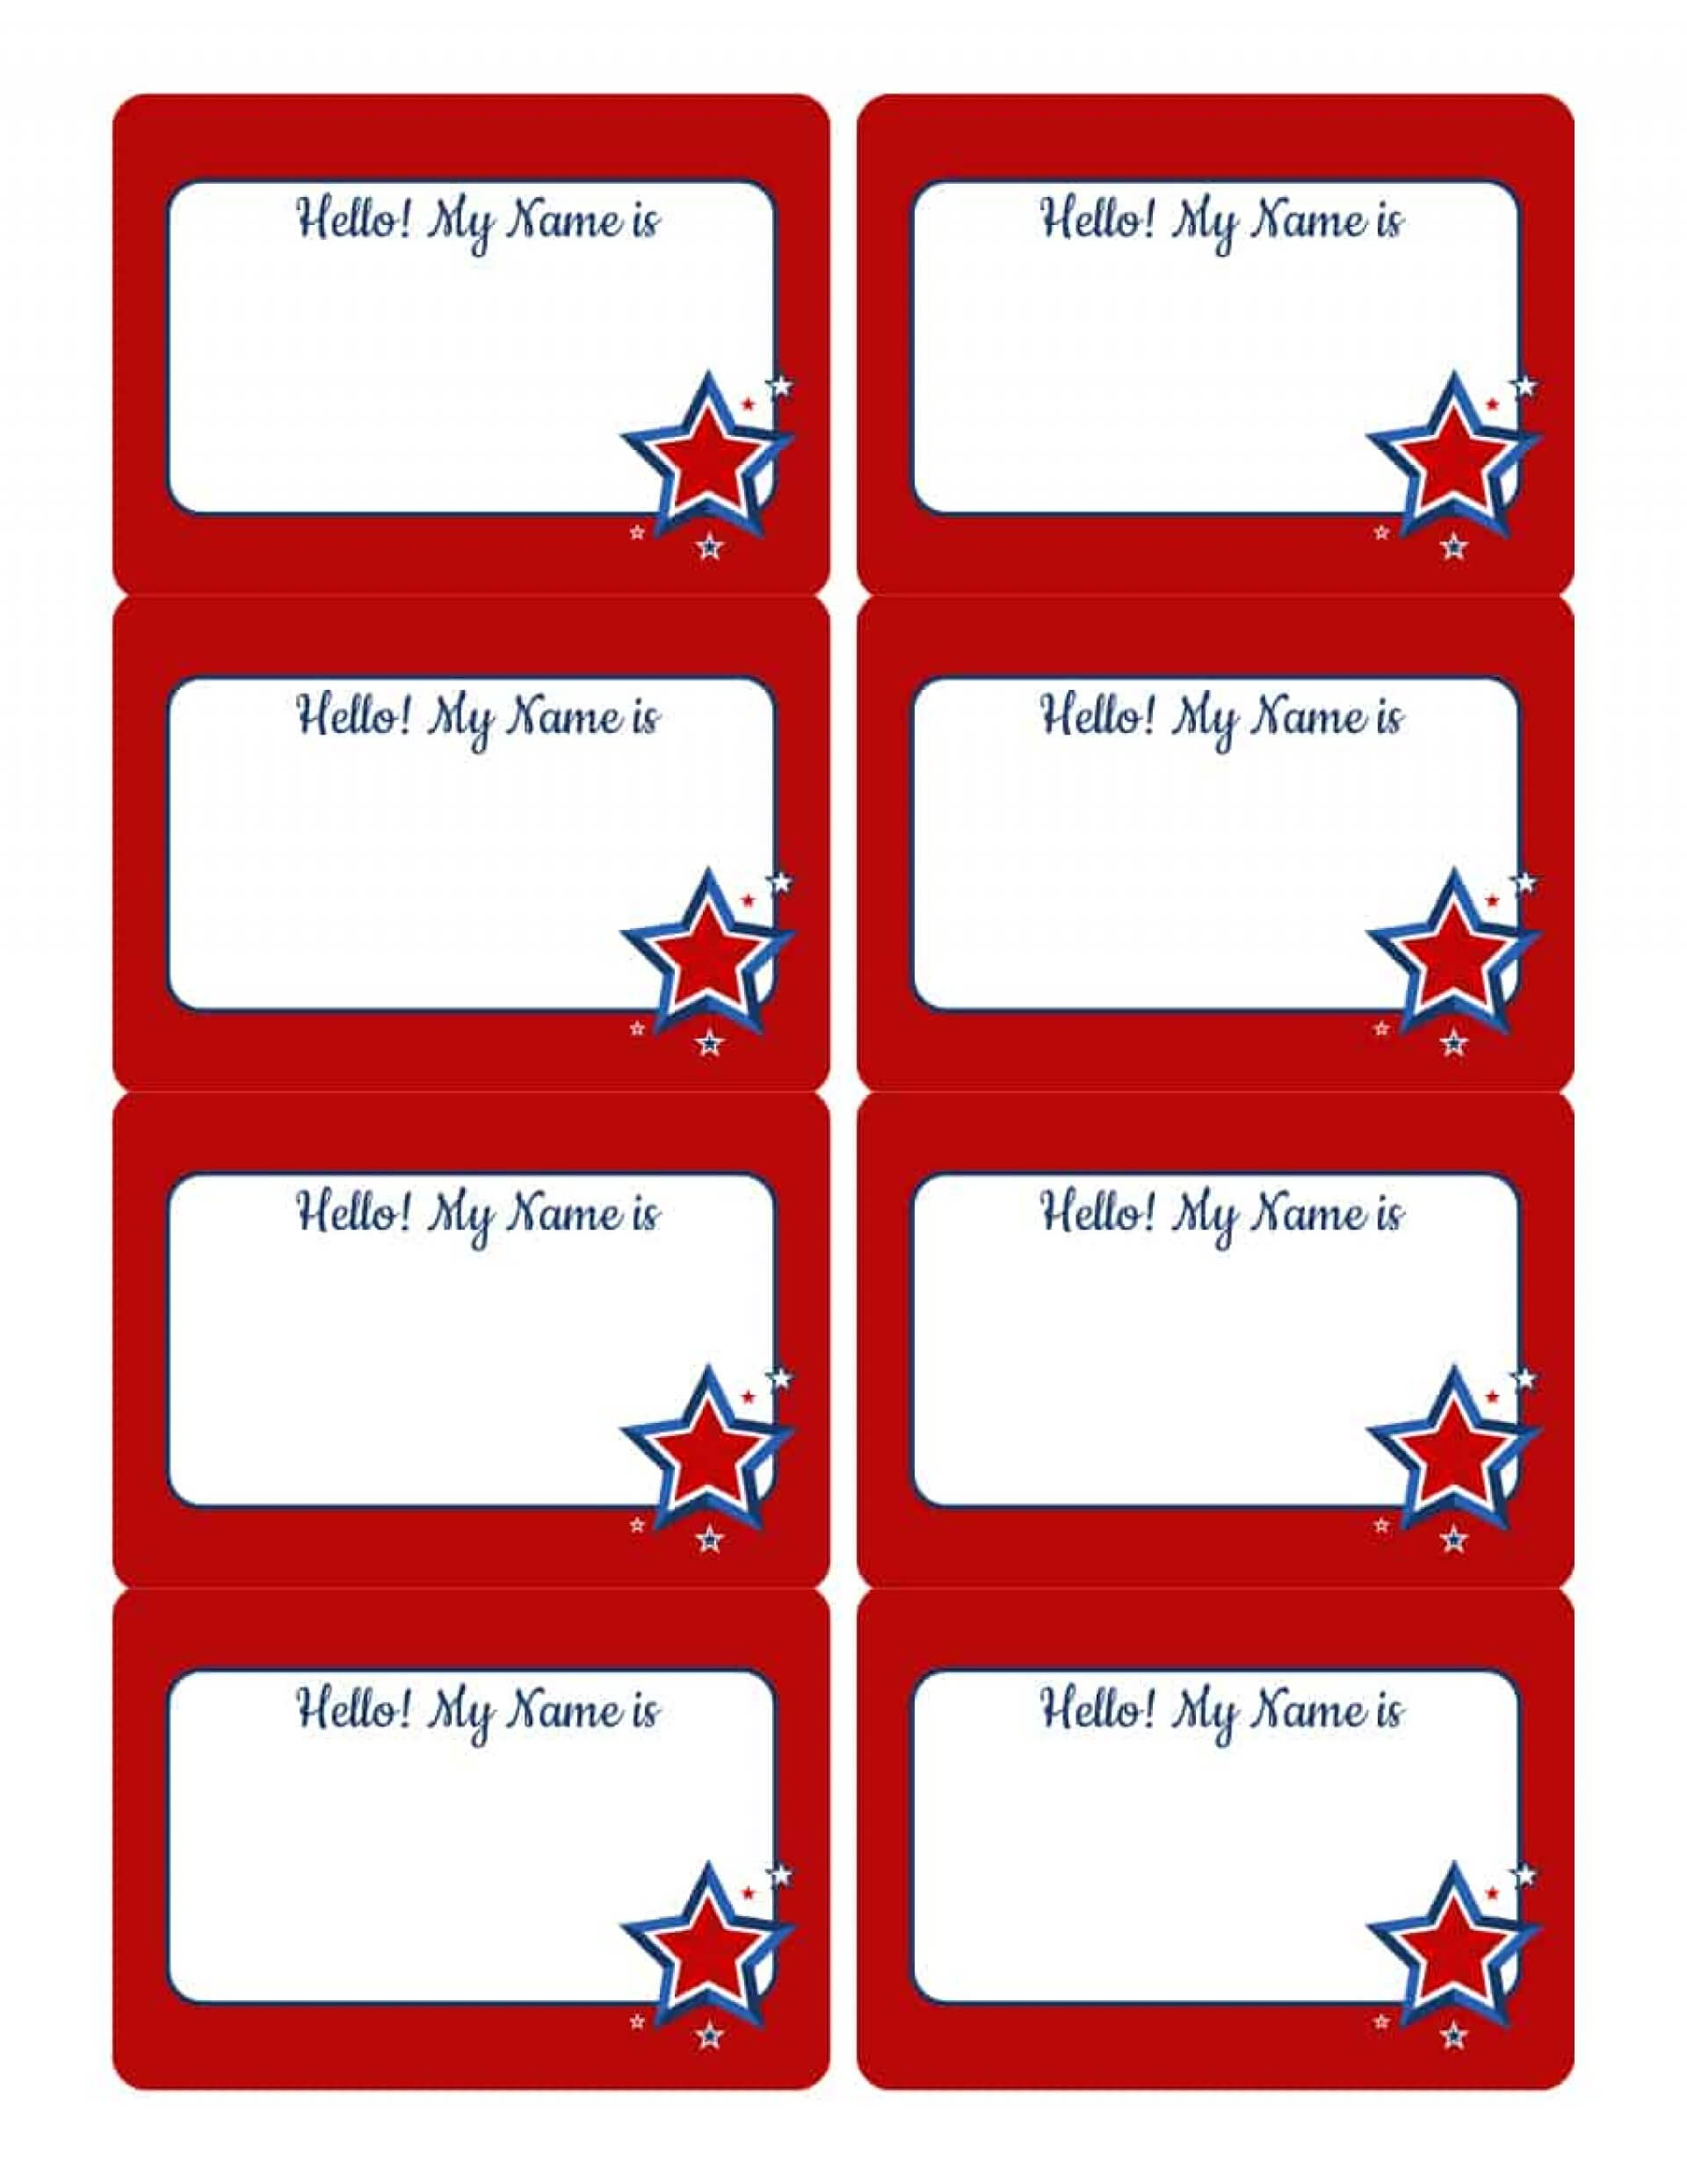 free-printable-glitter-name-tags-the-template-can-also-be-used-for-creating-items-like-labels